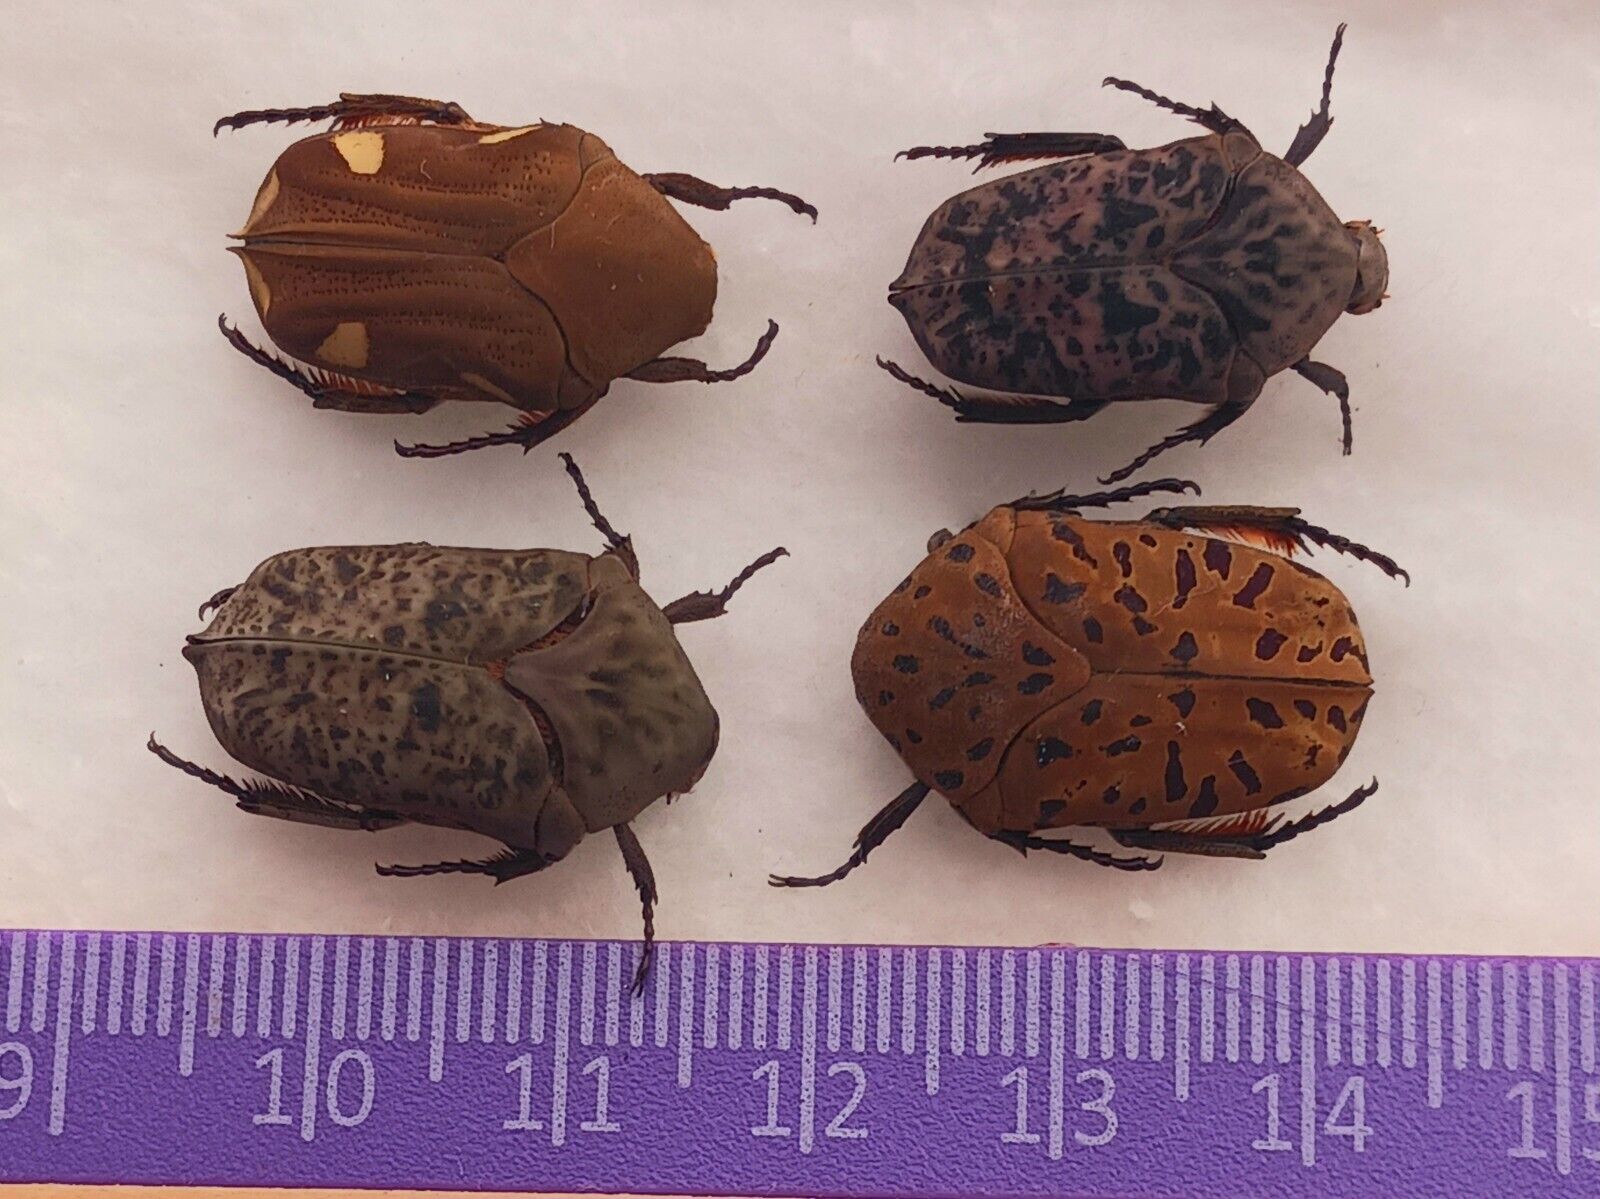 COLEOPTERA CETONIIDAE MIXT SP LOT OF 4 AMAZING COLORS 20-21mm FROM ATALAYA-PERU 